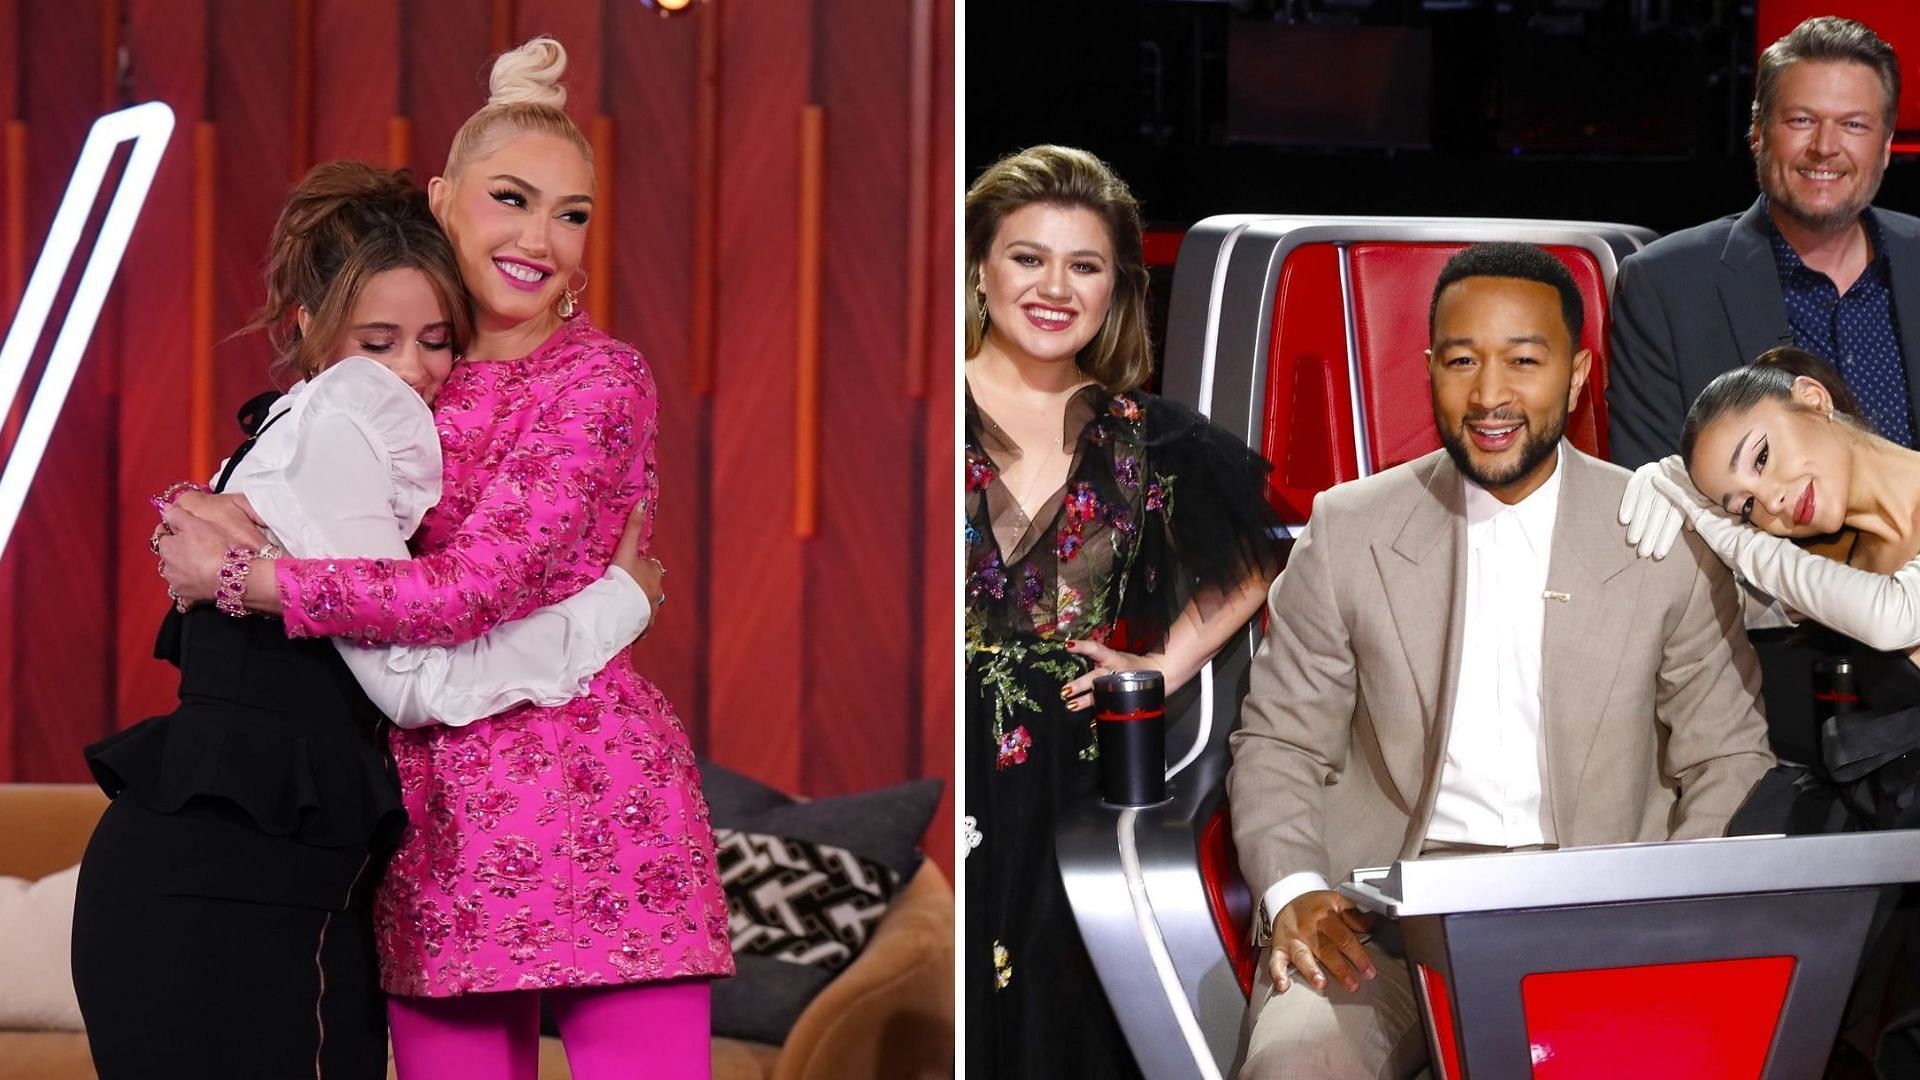 Who won The Voice each season? Names of winning coaches and singers